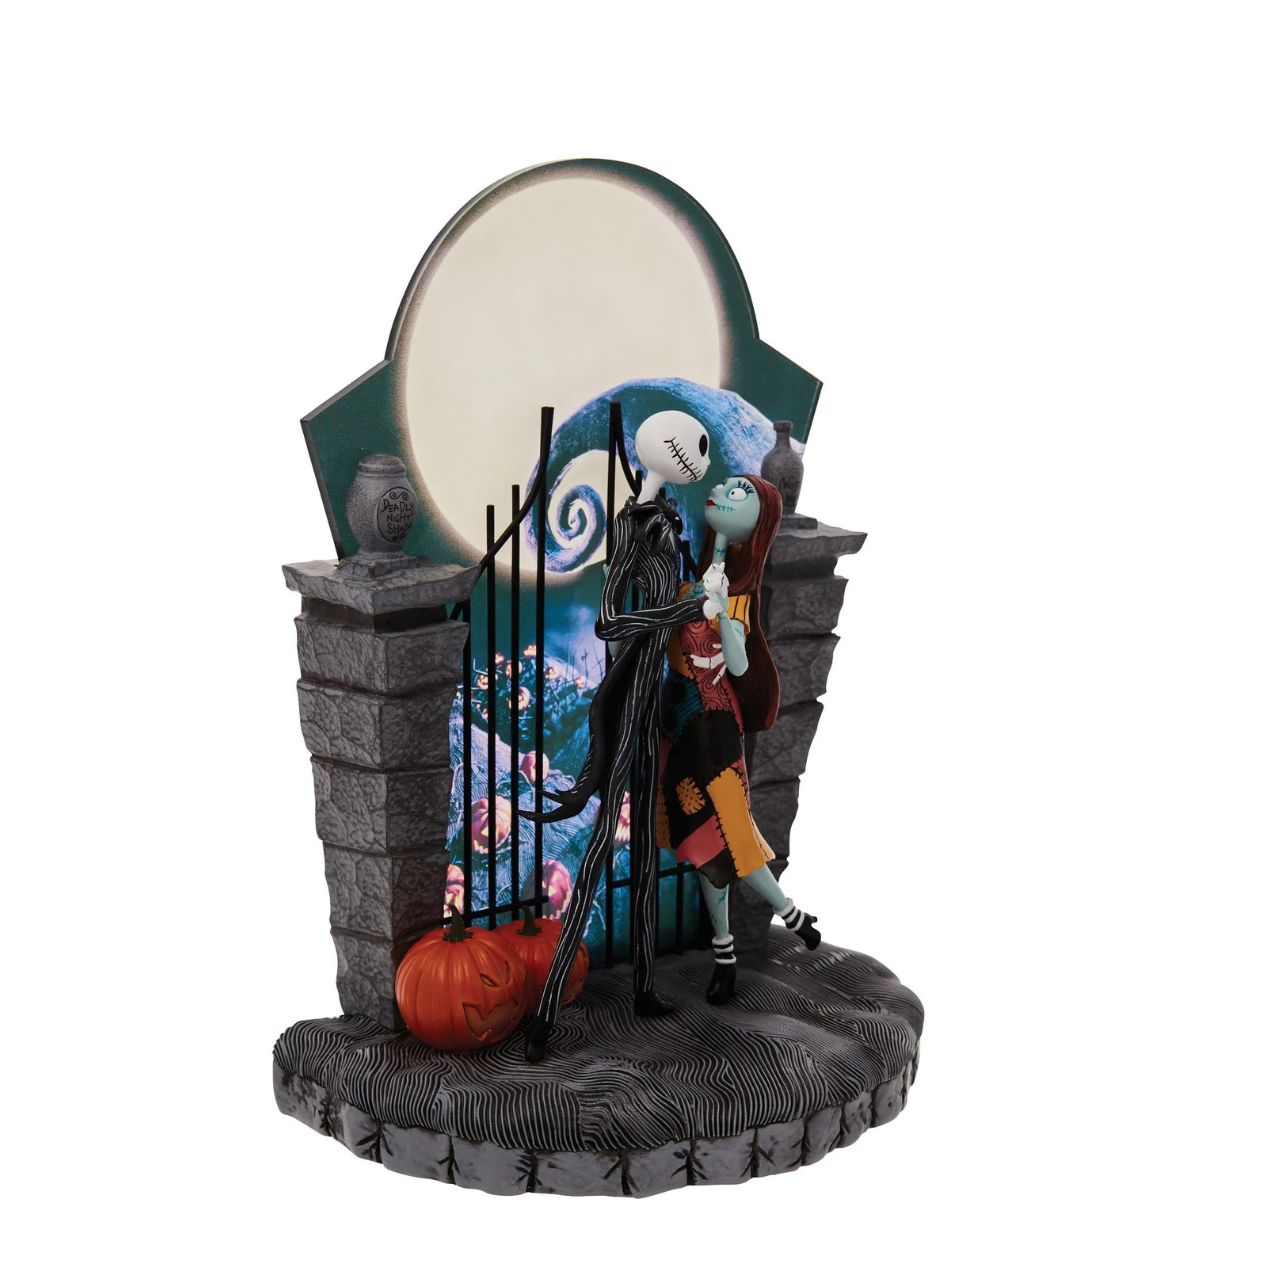 Nightmare Before Christmas Figurine  A lit up Halloween moon forms the back drop of this endearing scene from The Nightmare Before Christmas. Jack and Sally's graveyard waltz is frozen in time with only jack-o-lanterns as their witnesses.